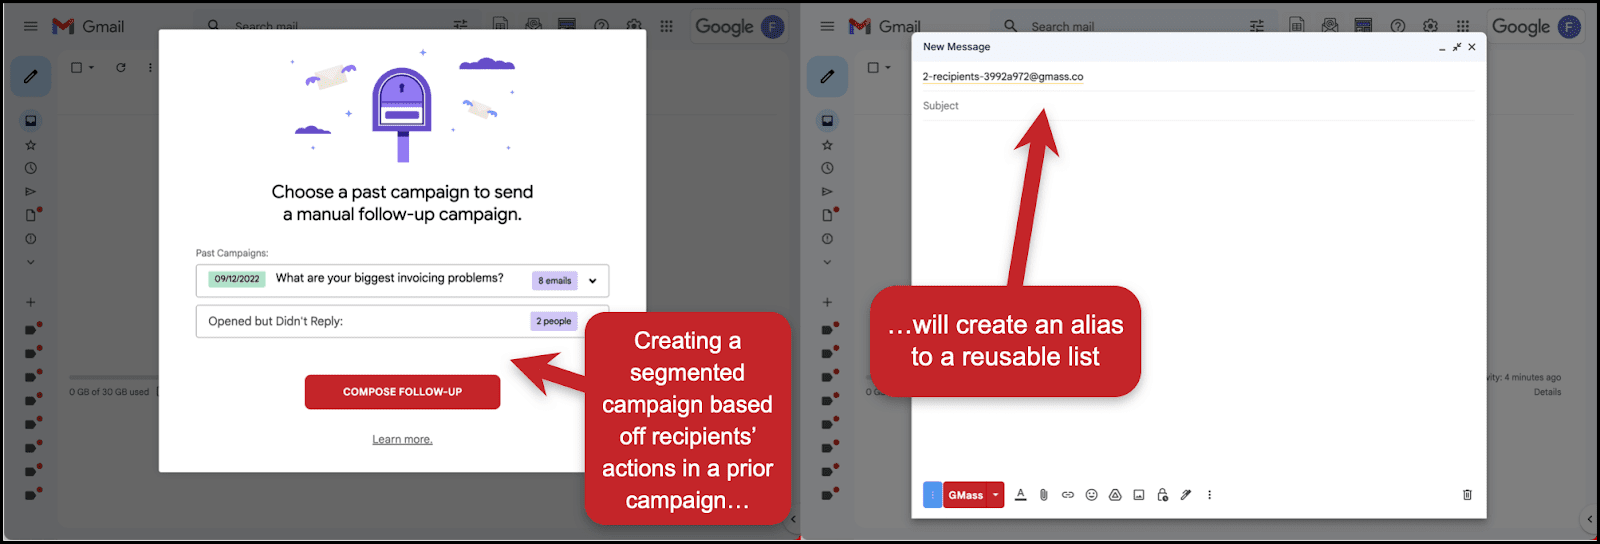 Segmented campaigns create reusable lists